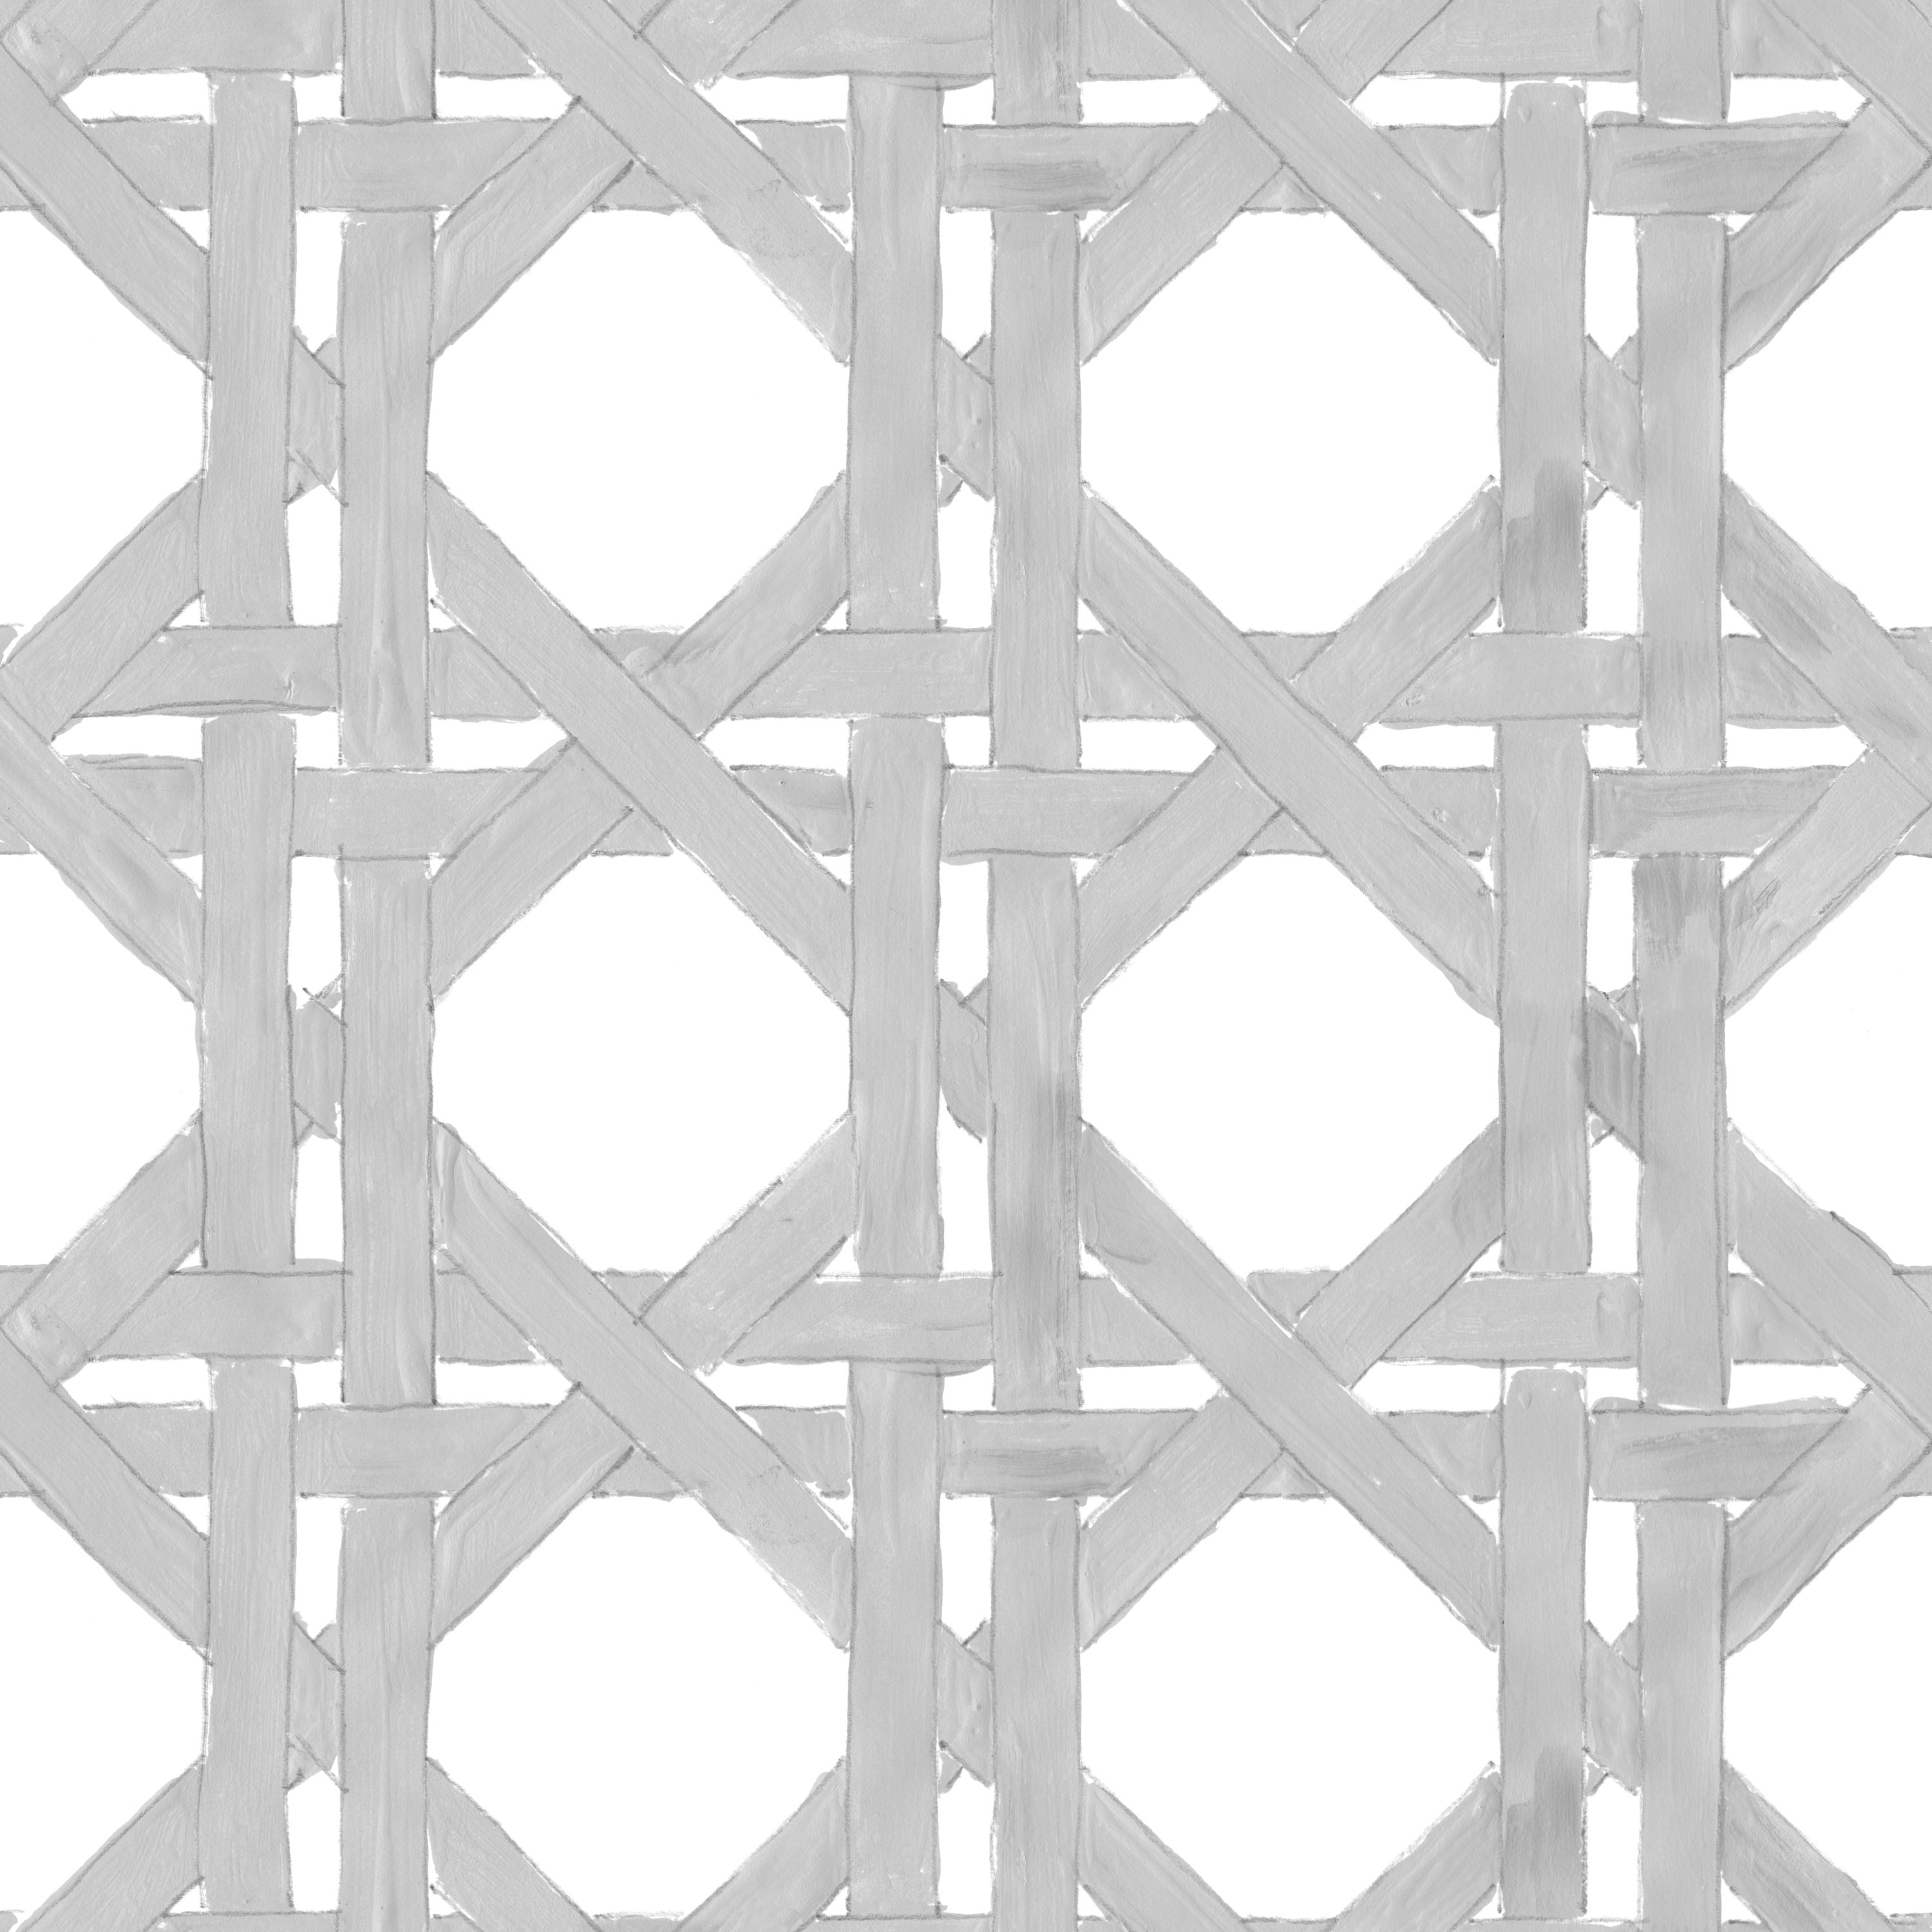 Detail of wallpaper in a geometric lattice print in gray on a white field.